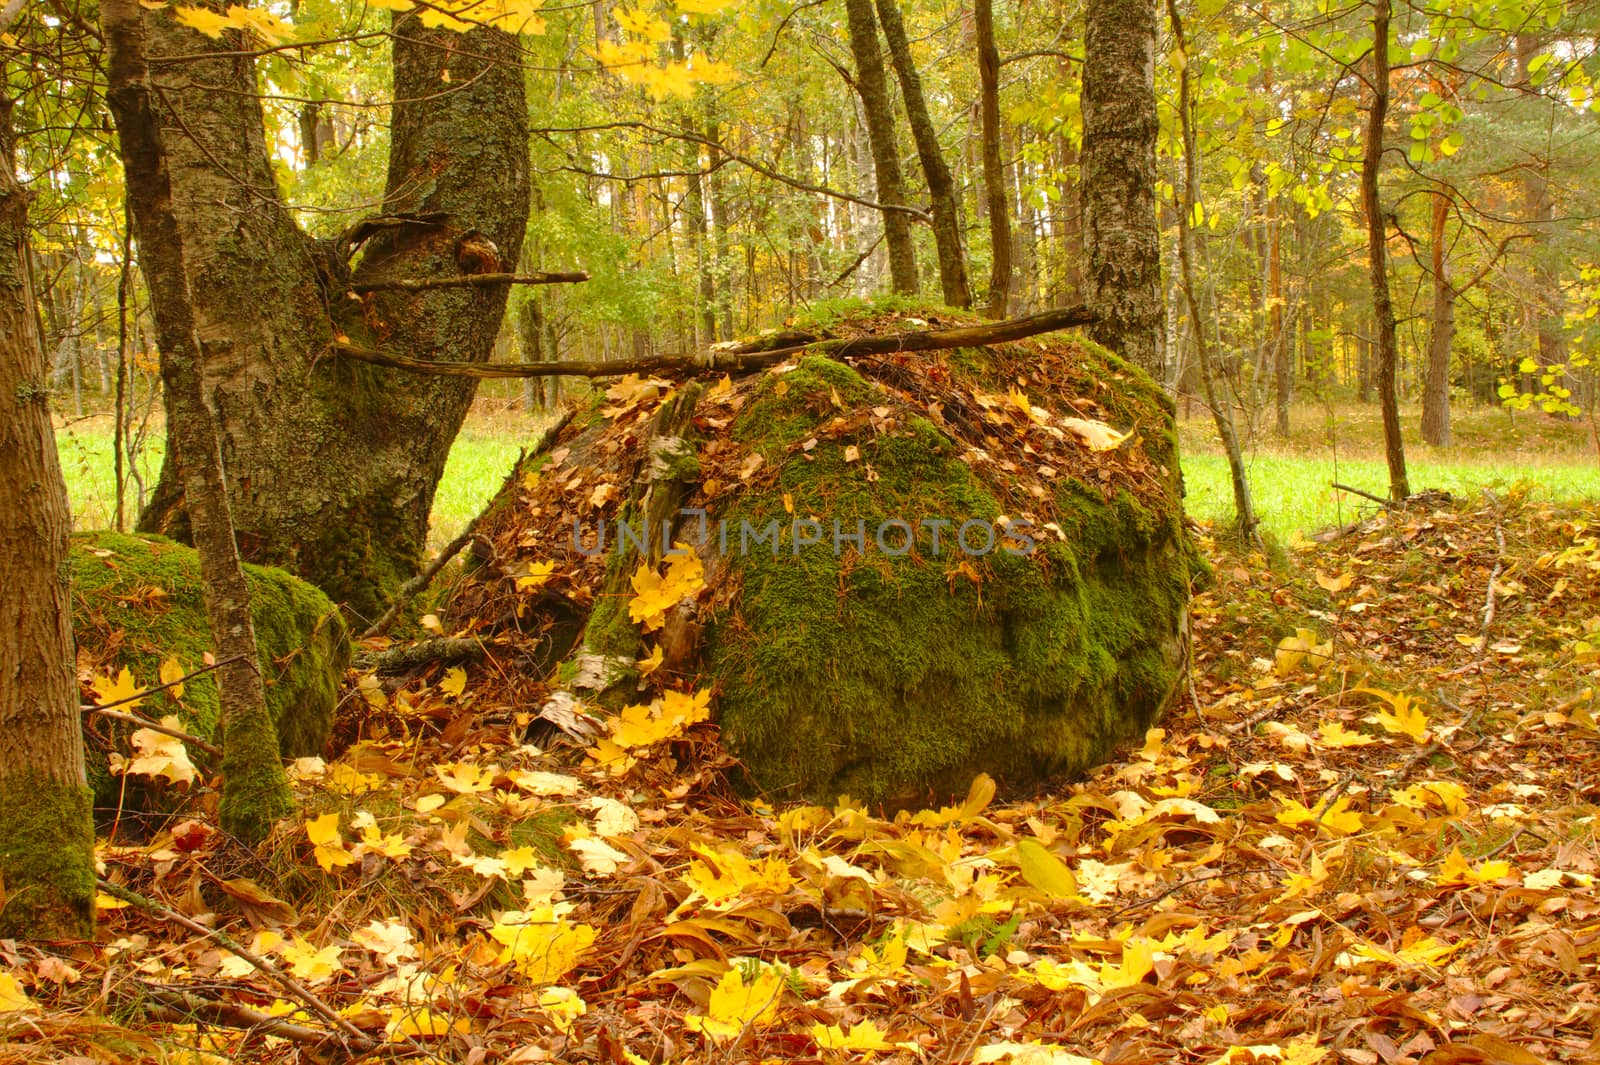 Green lichen on a rock covered with fallen leaves. Leaves on the ground in fall